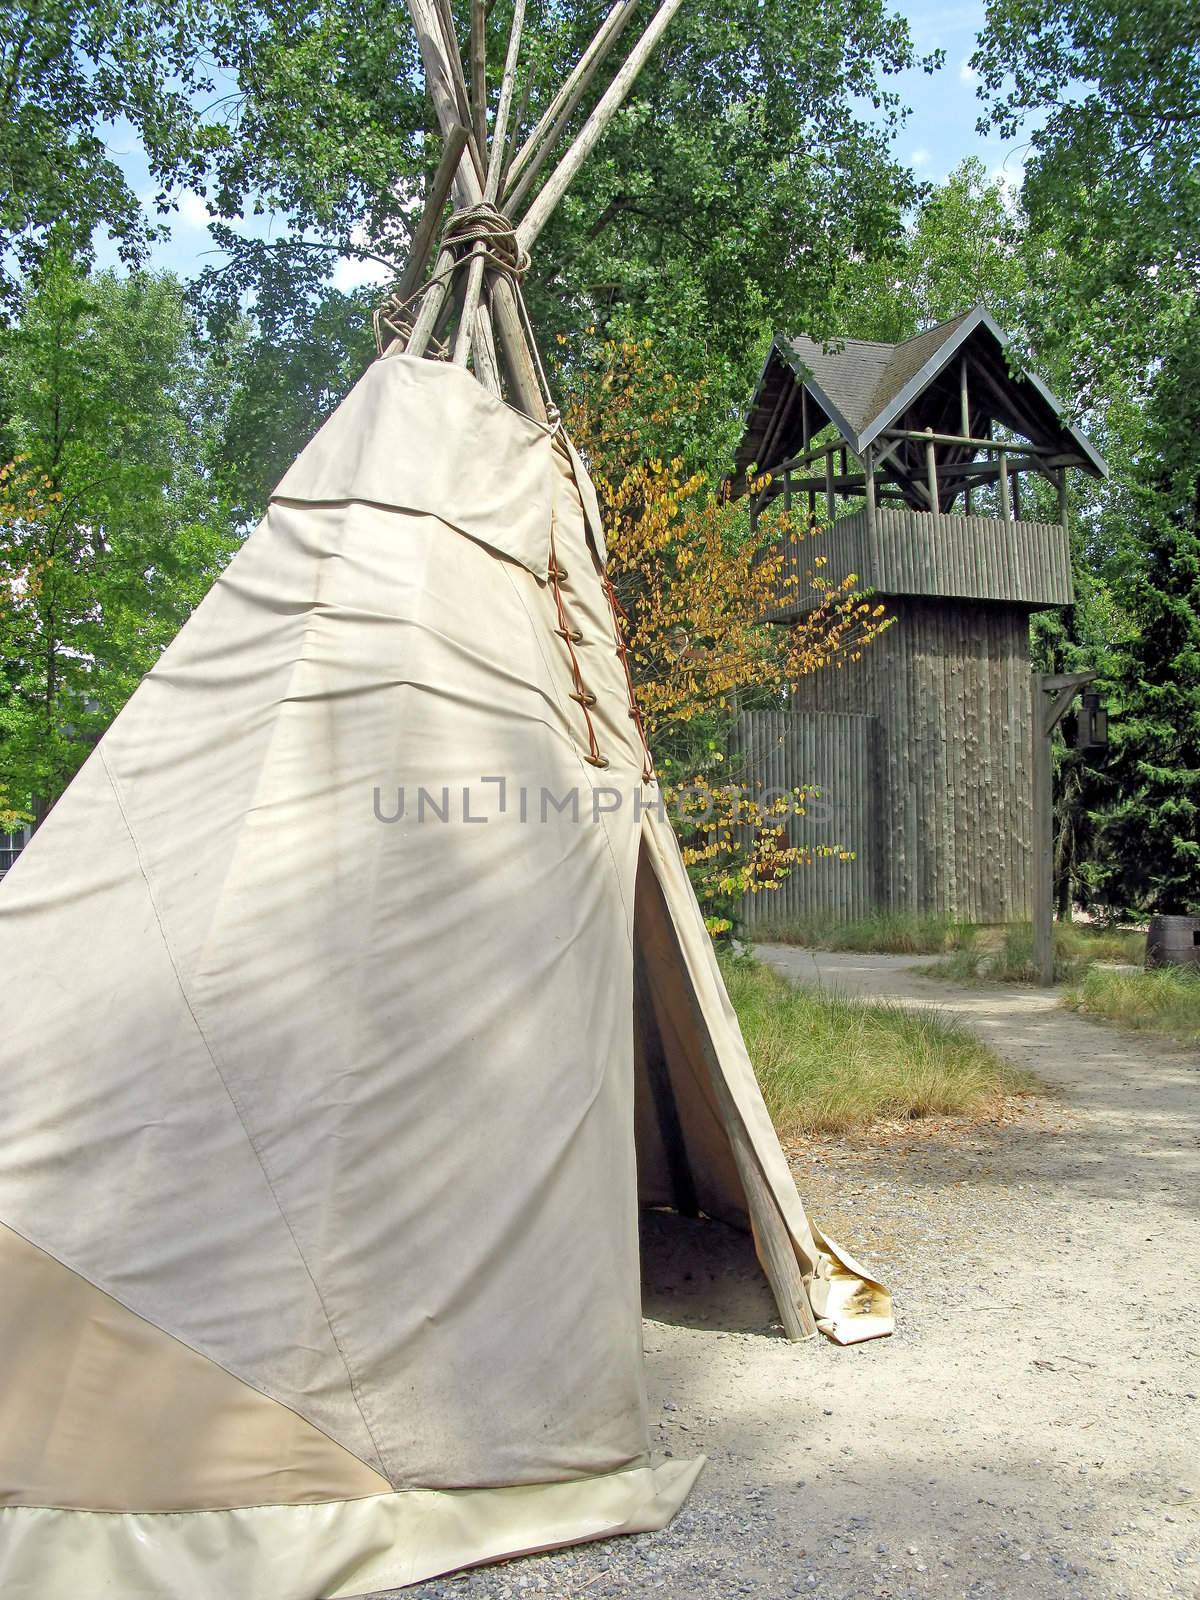 Teepee in a forest with a wooden fort behind.